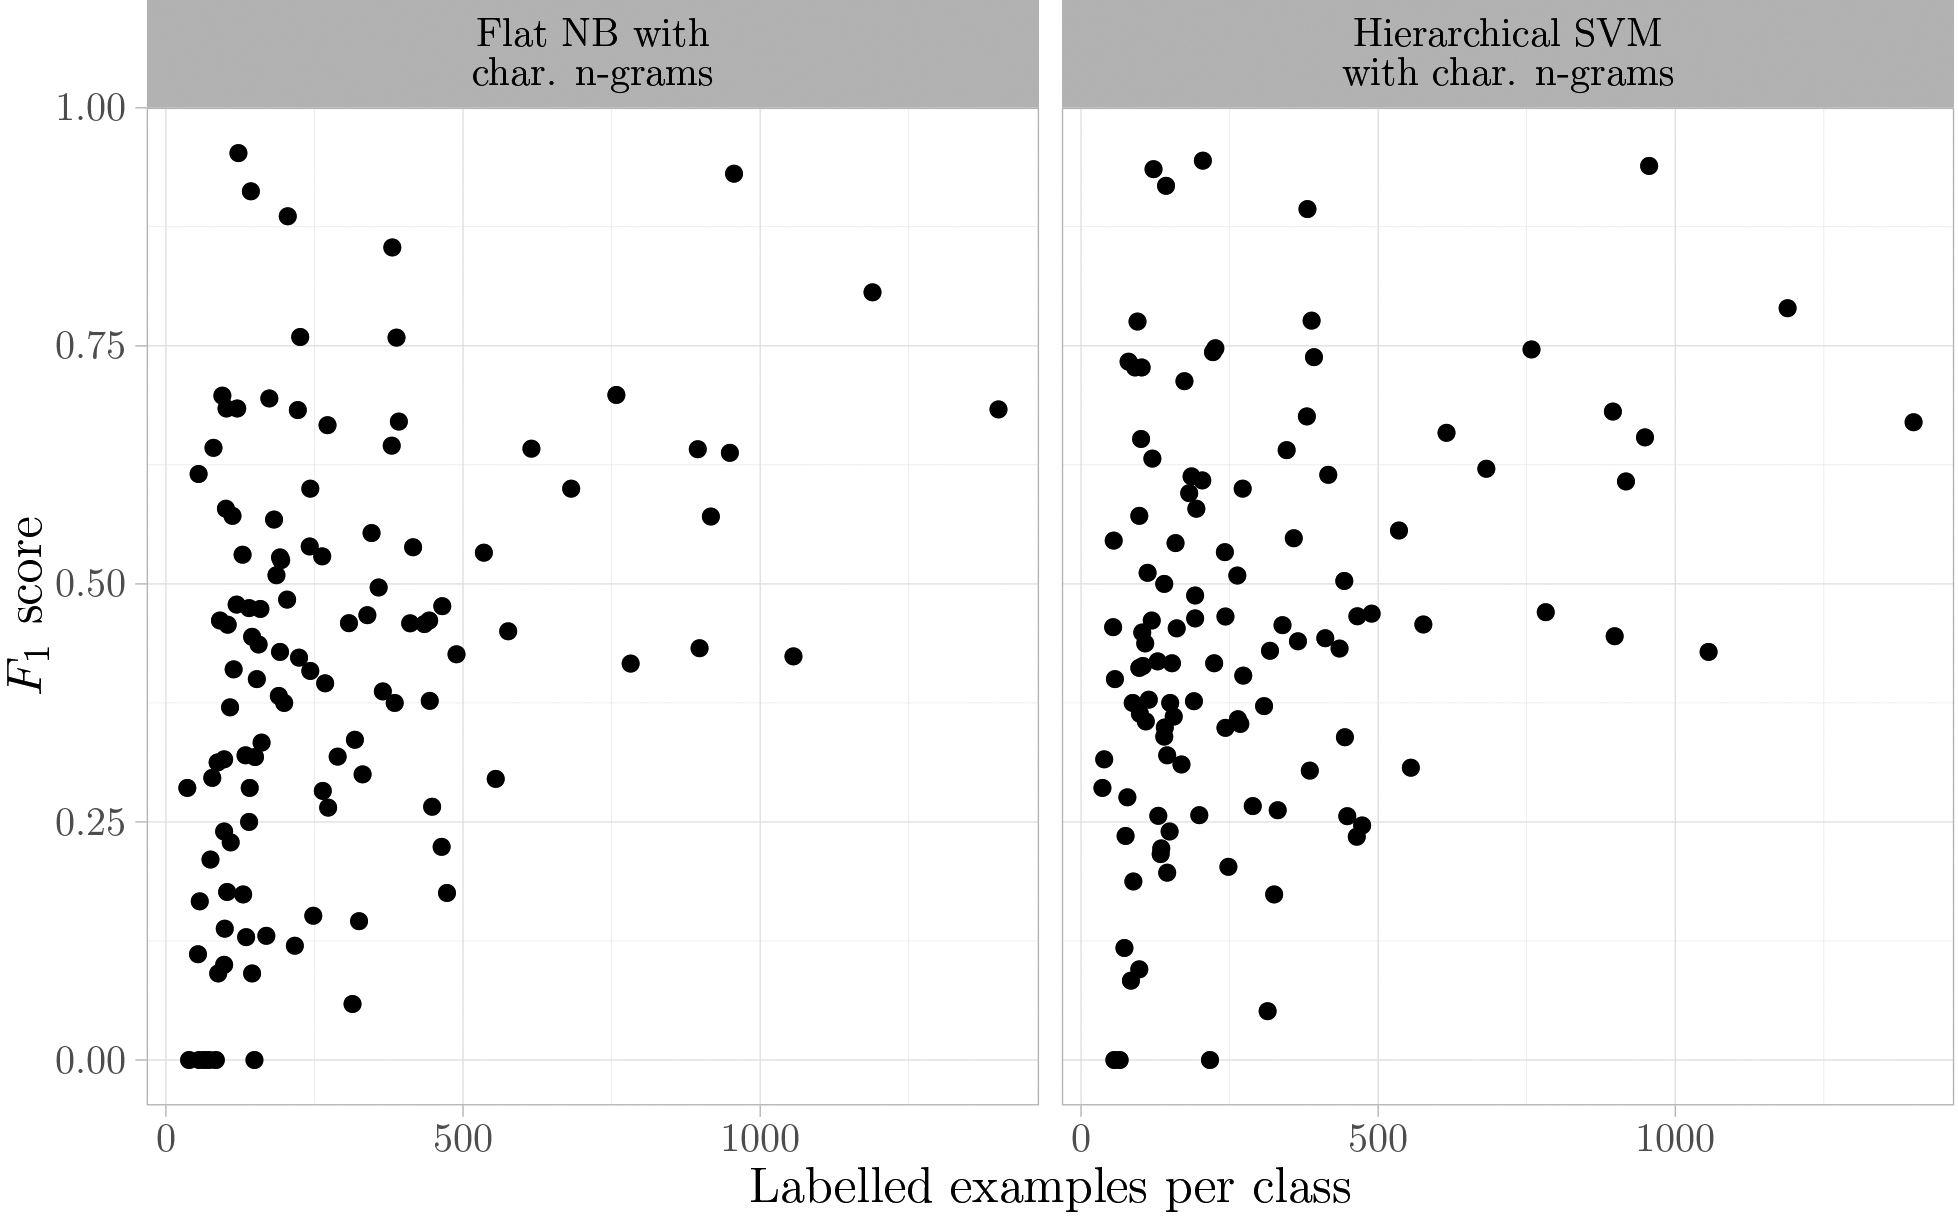 F1 for different class sizes for two models with character n-grams.